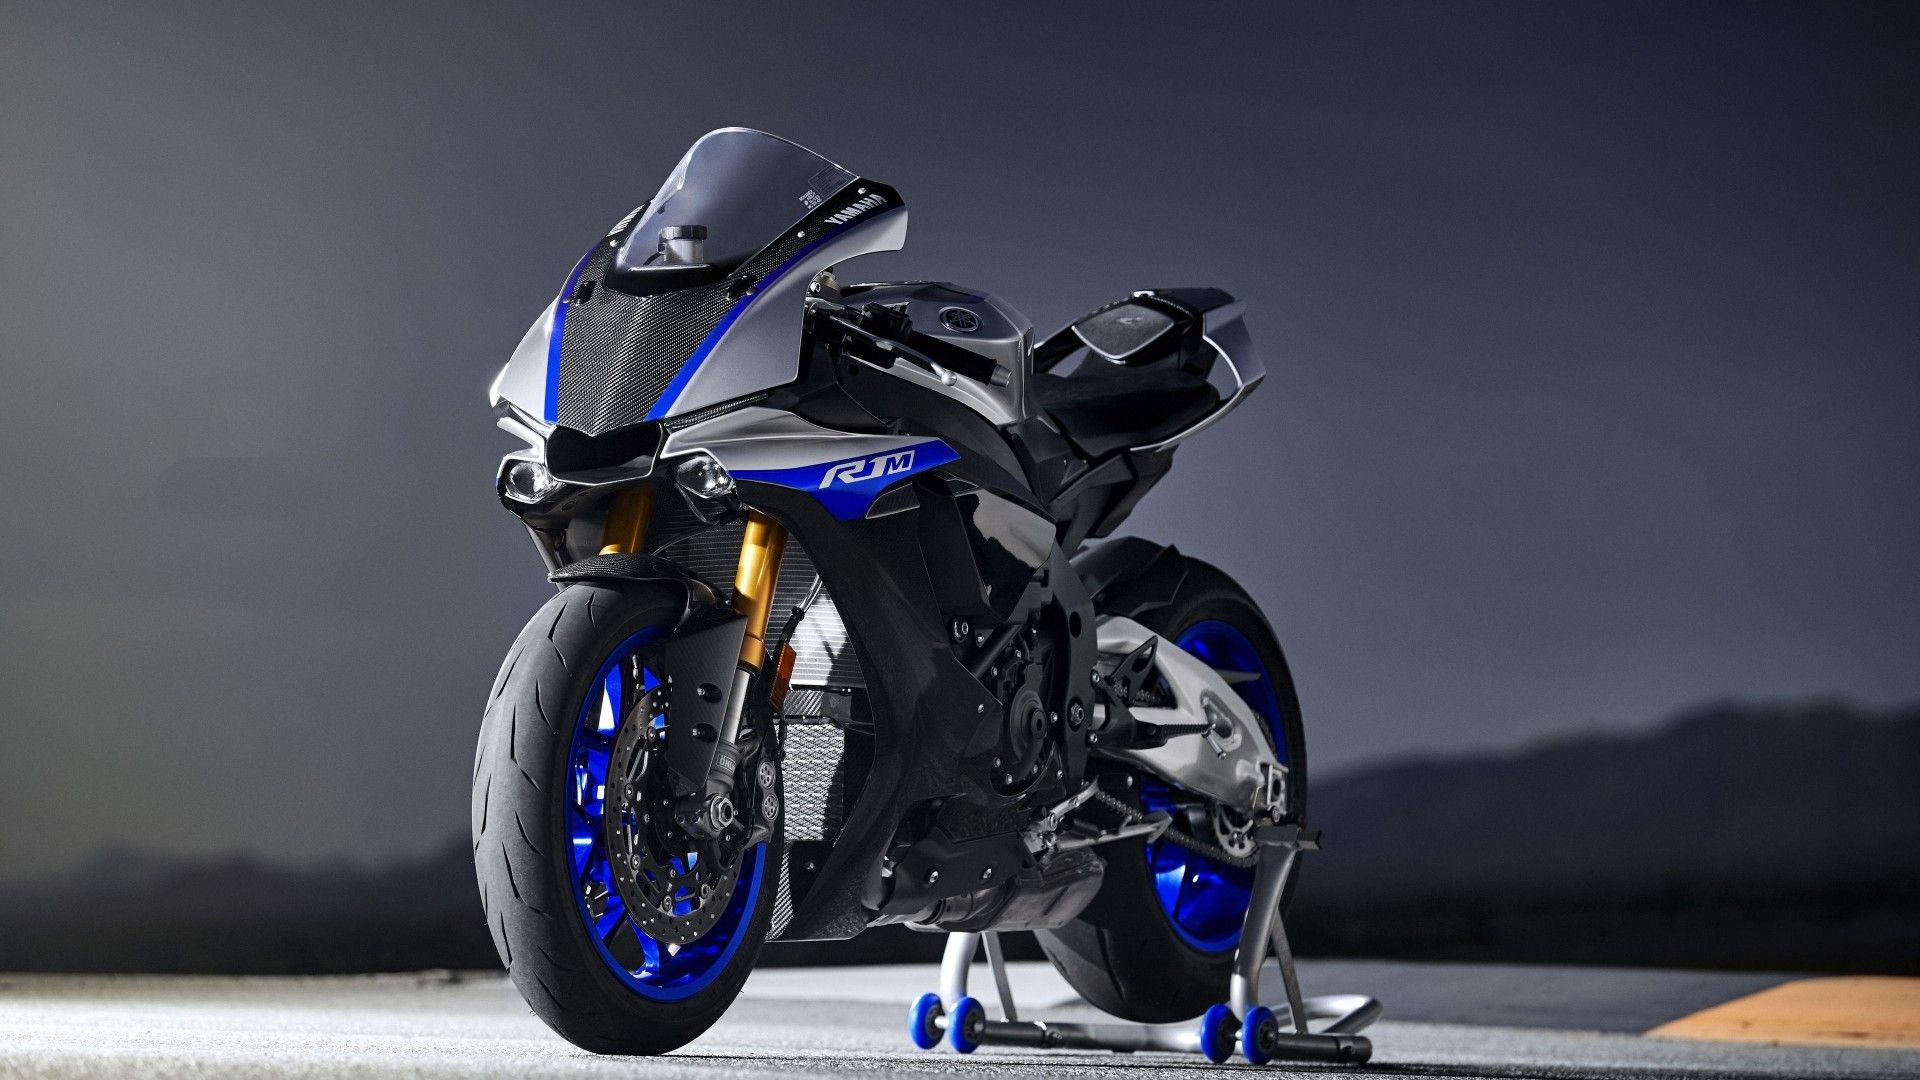 The front of the 2021 Yamaha YZF-R1M bike. 